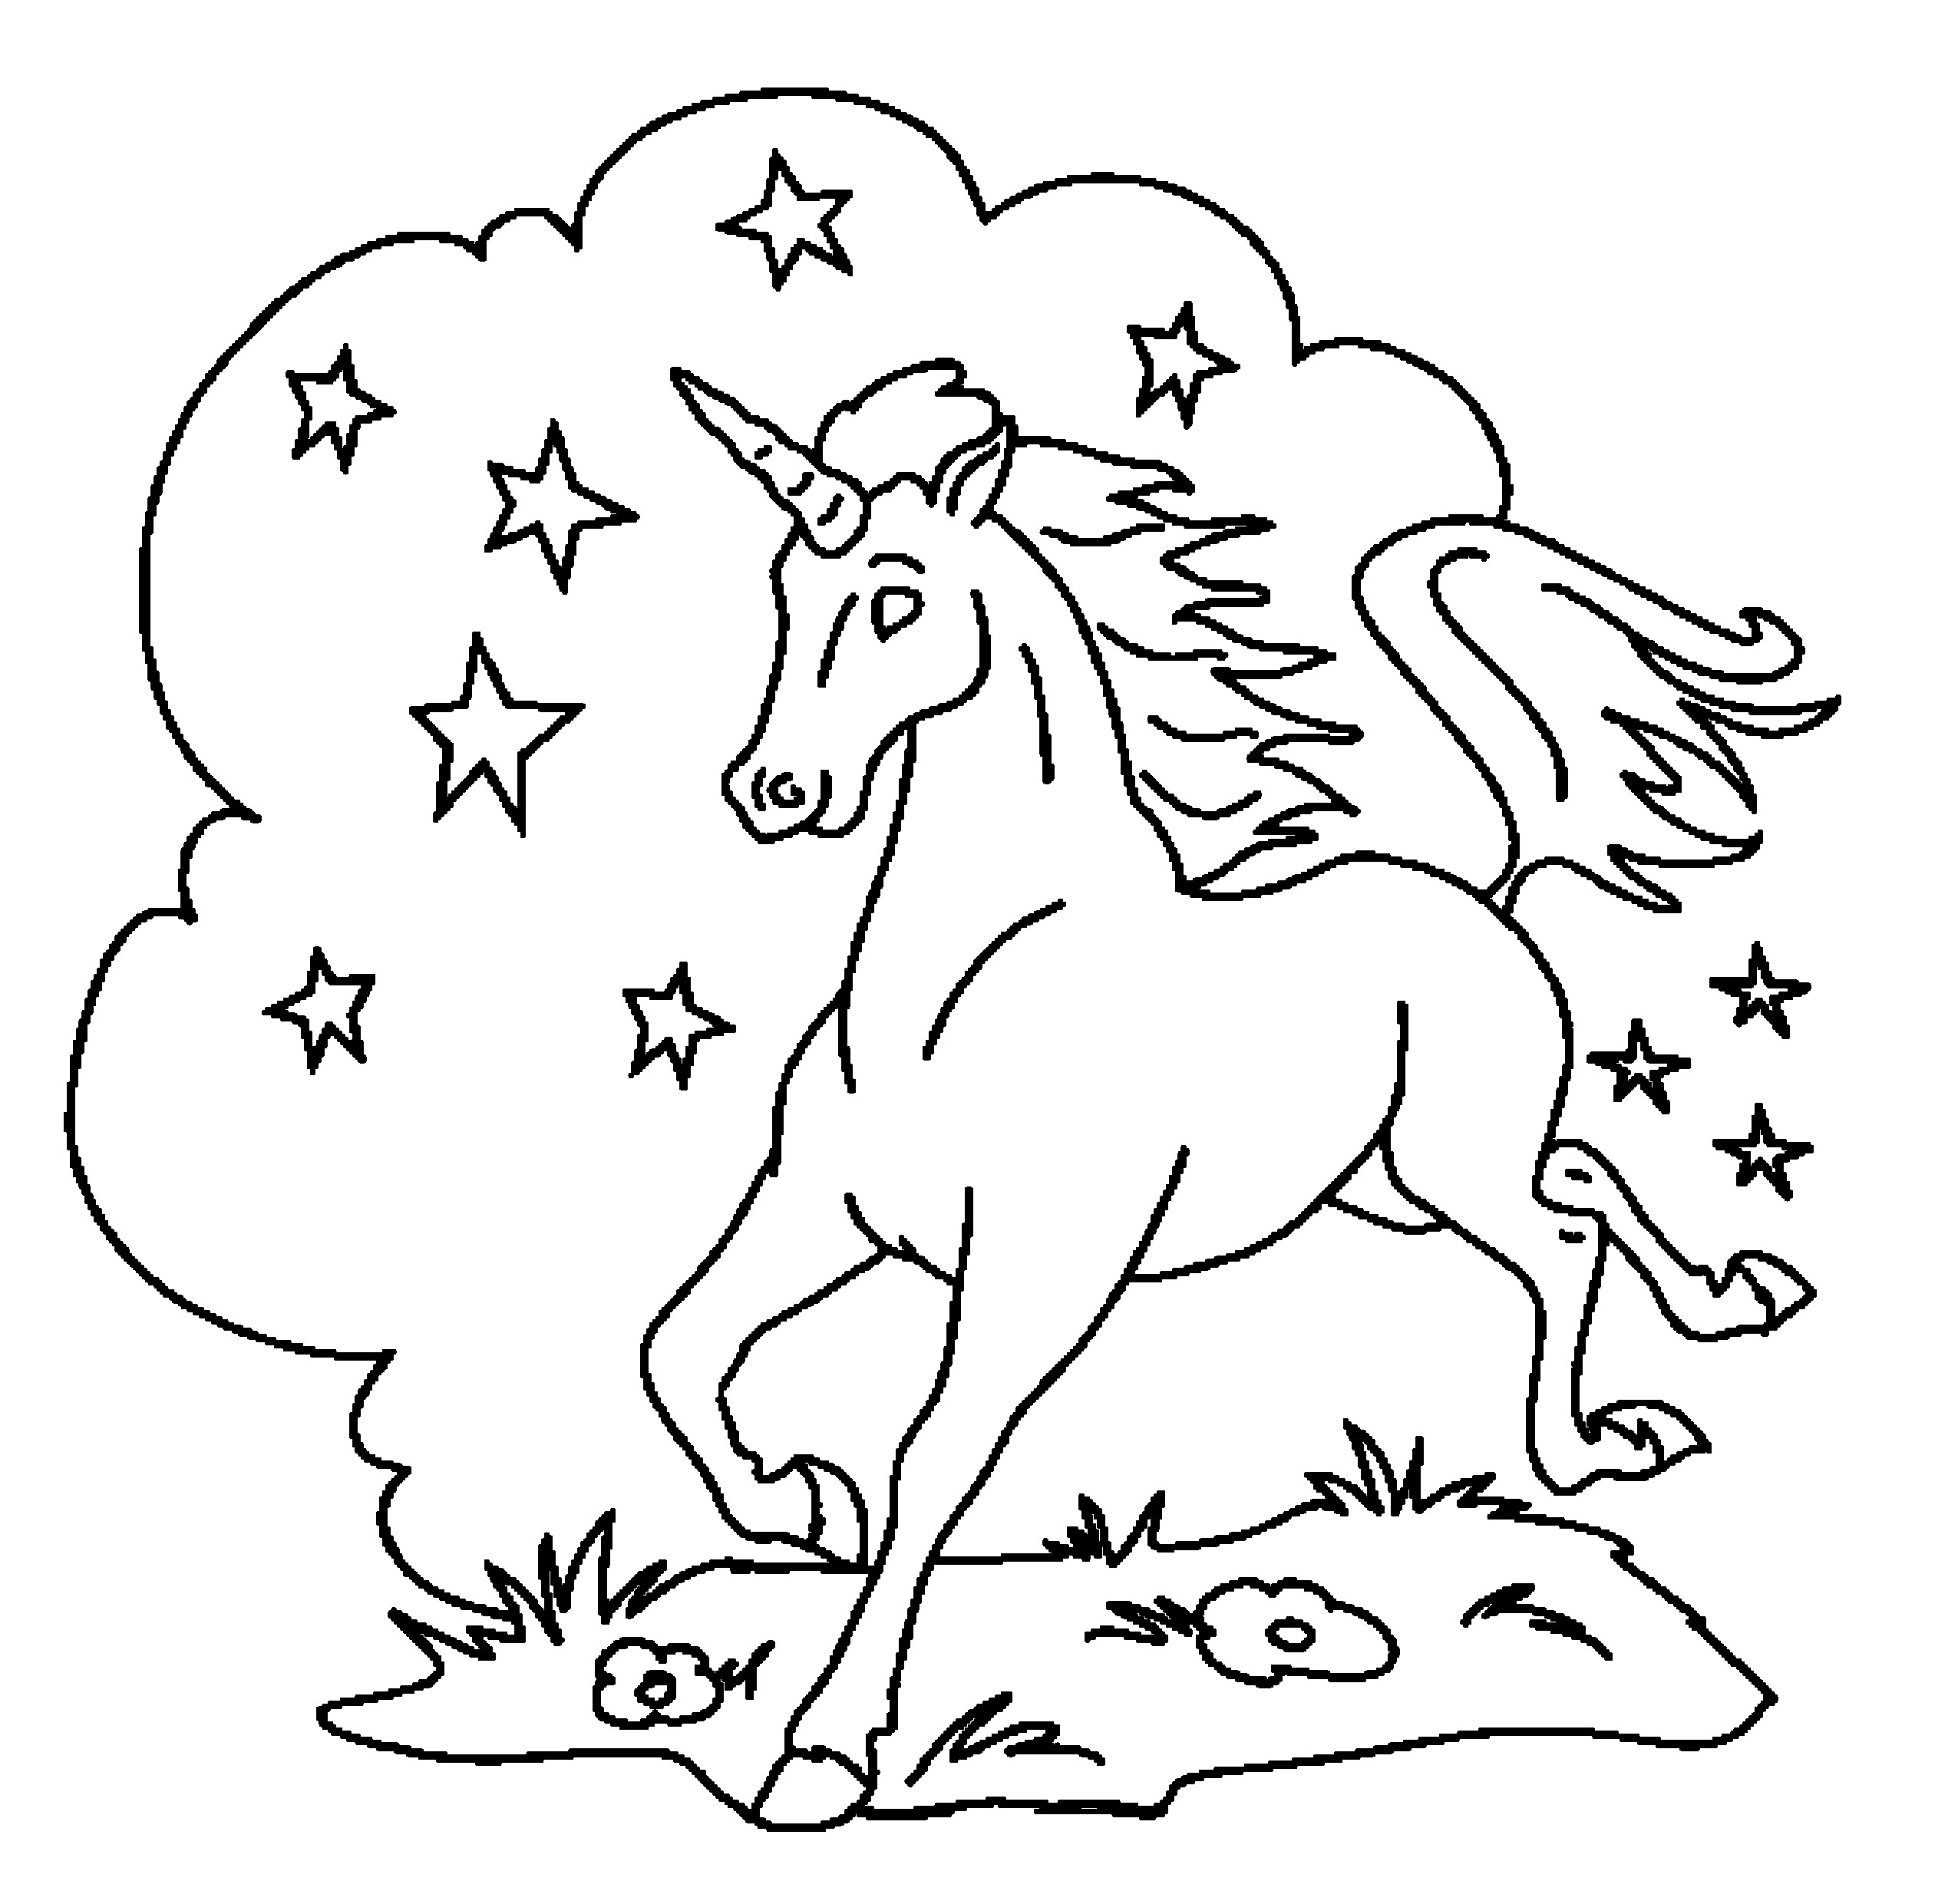 Unicorn Coloring Pages For Kids
 Print & Download Unicorn Coloring Pages for Children